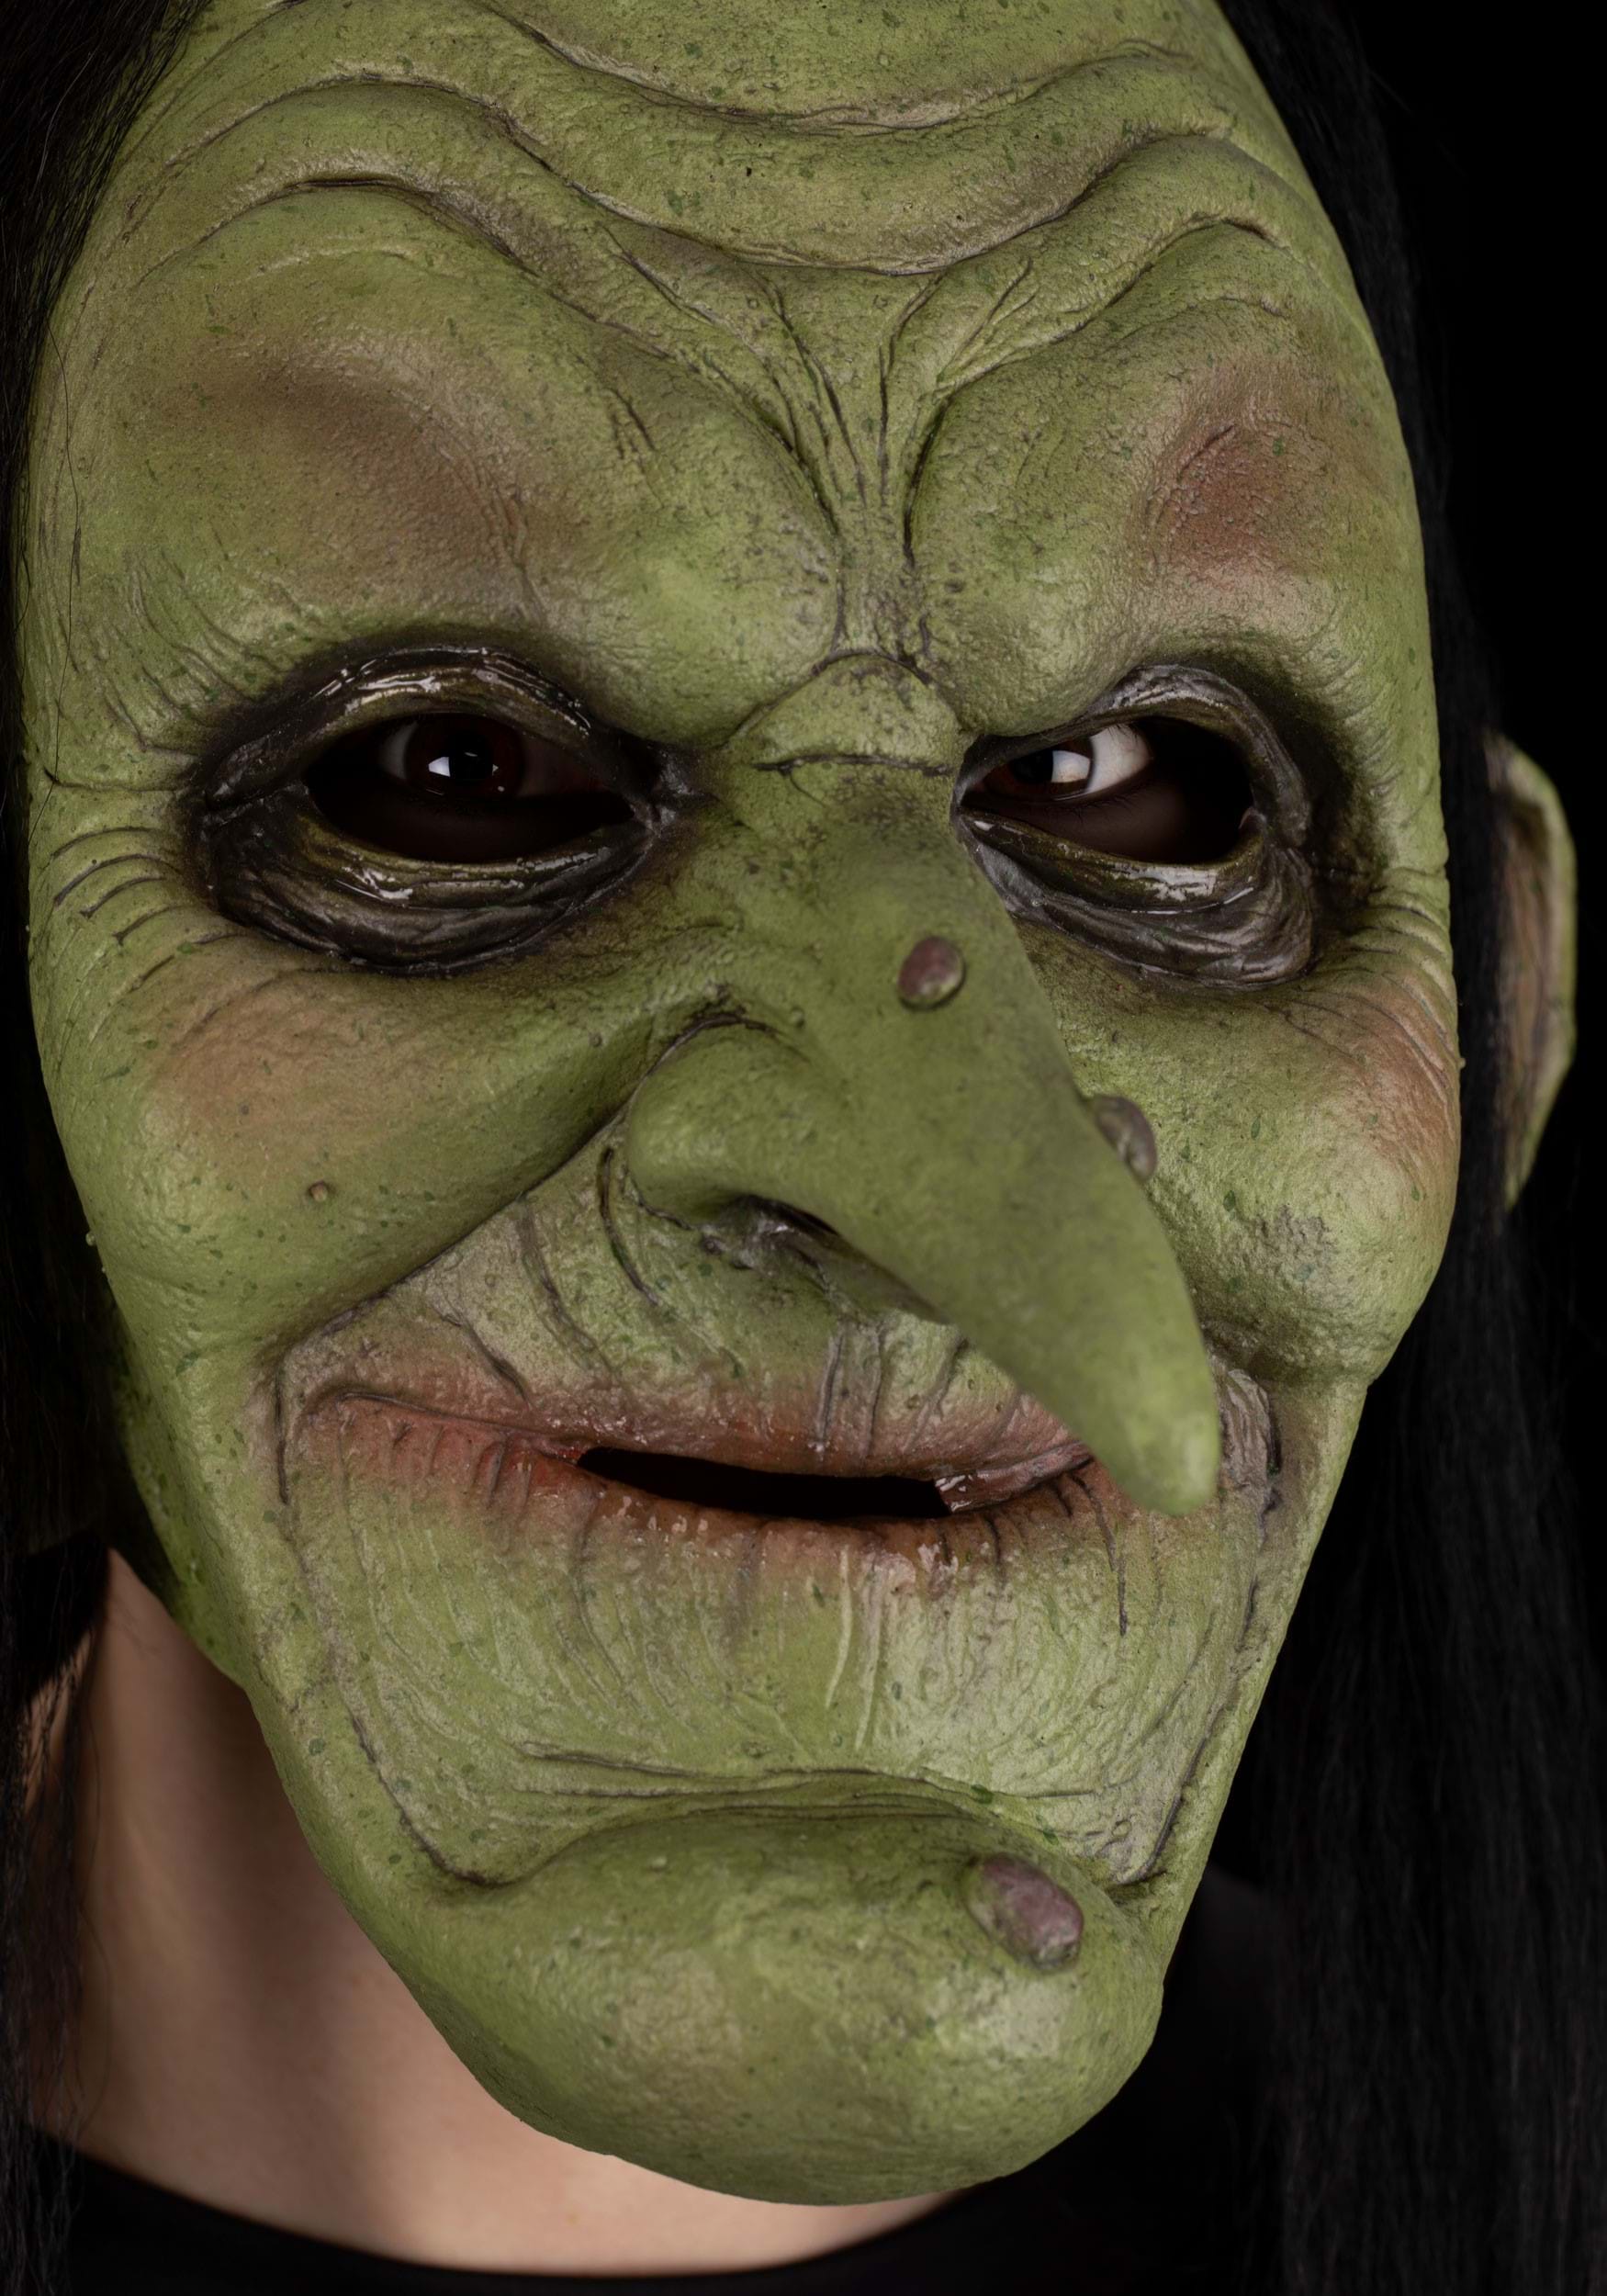 Green Witch Adult Mask